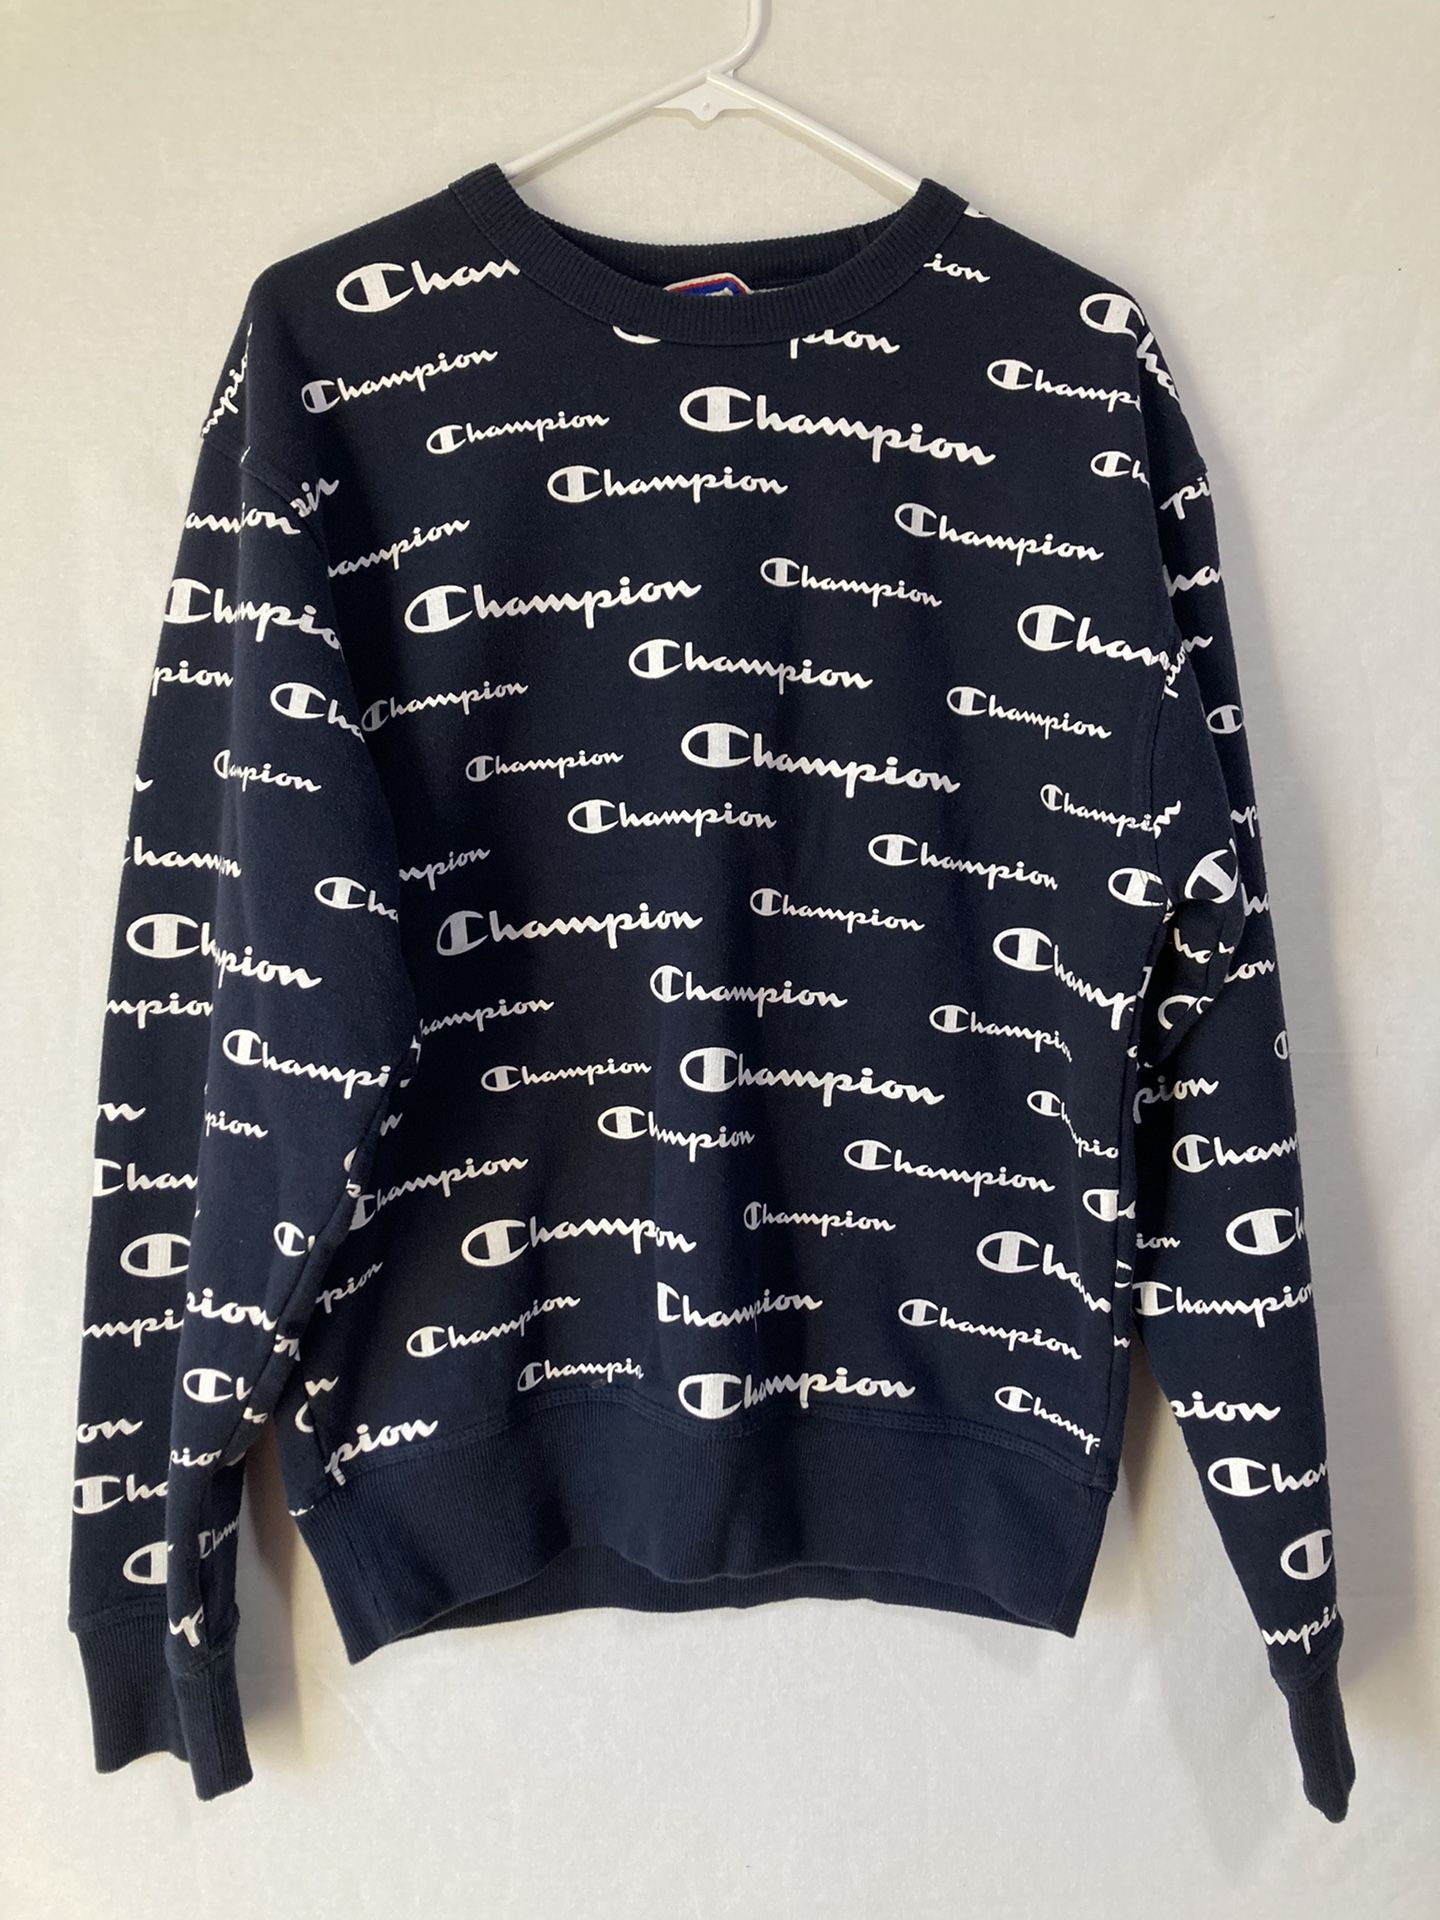 Champion Printed All Over Athleticwear Size SMALL Sweatshirt Pullover Crew Neck